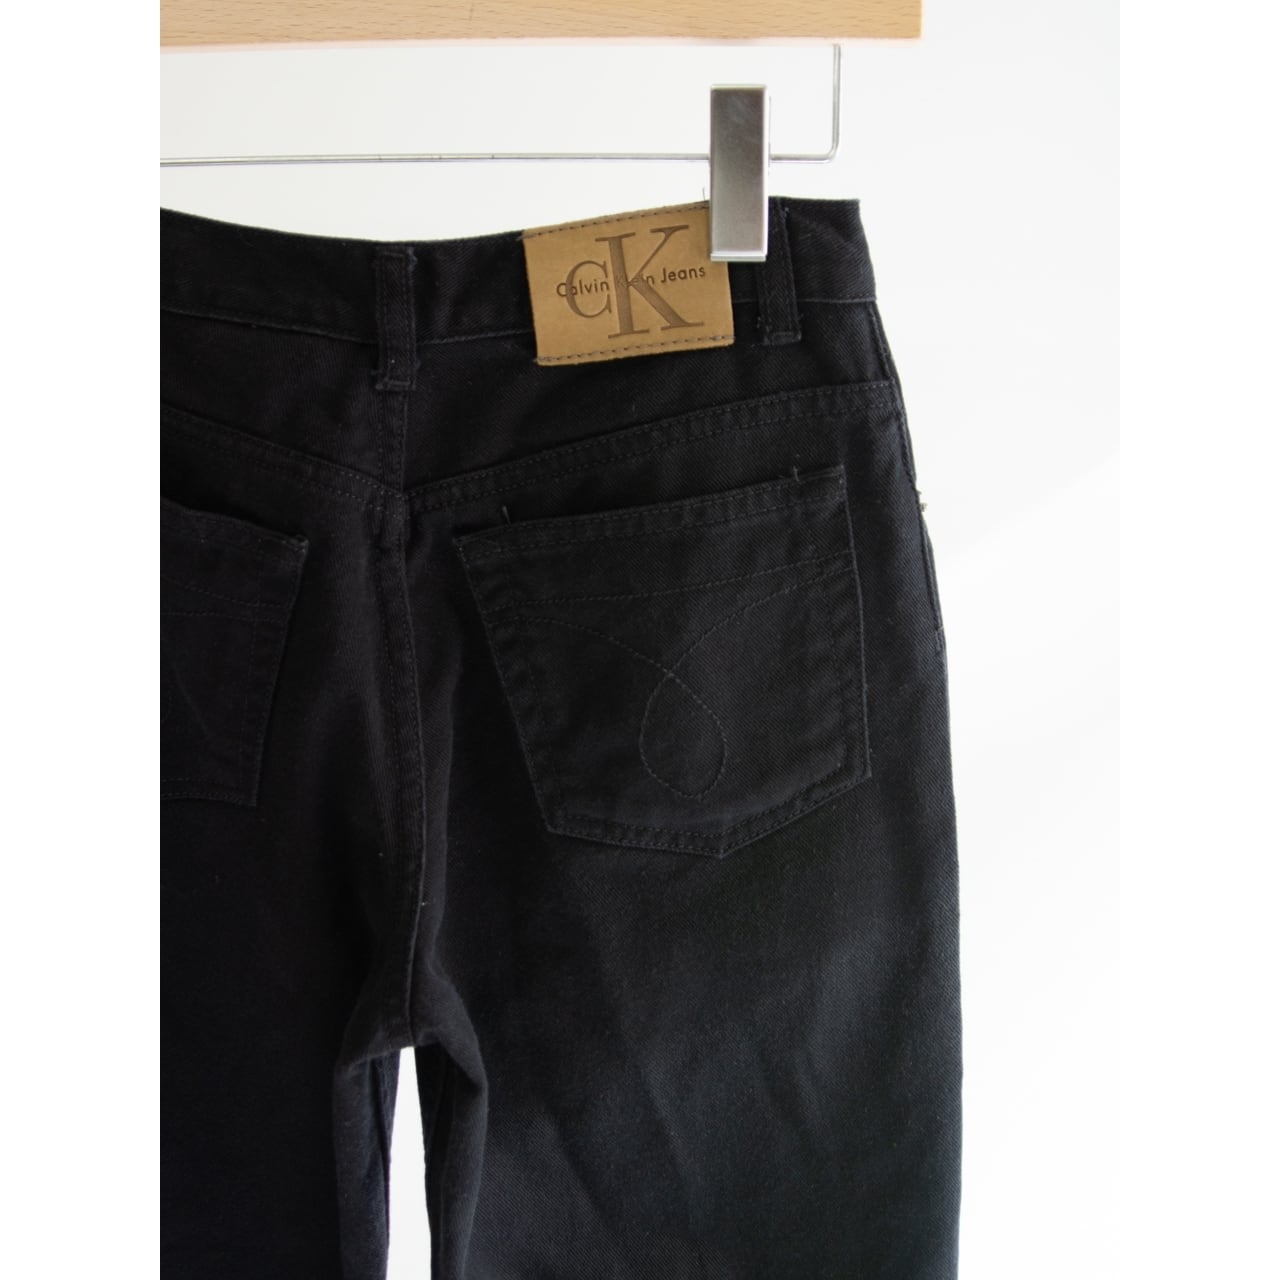 cK Calvin Klein】Made in Mexico 90's 100% Cotton Slim Fit Jeans